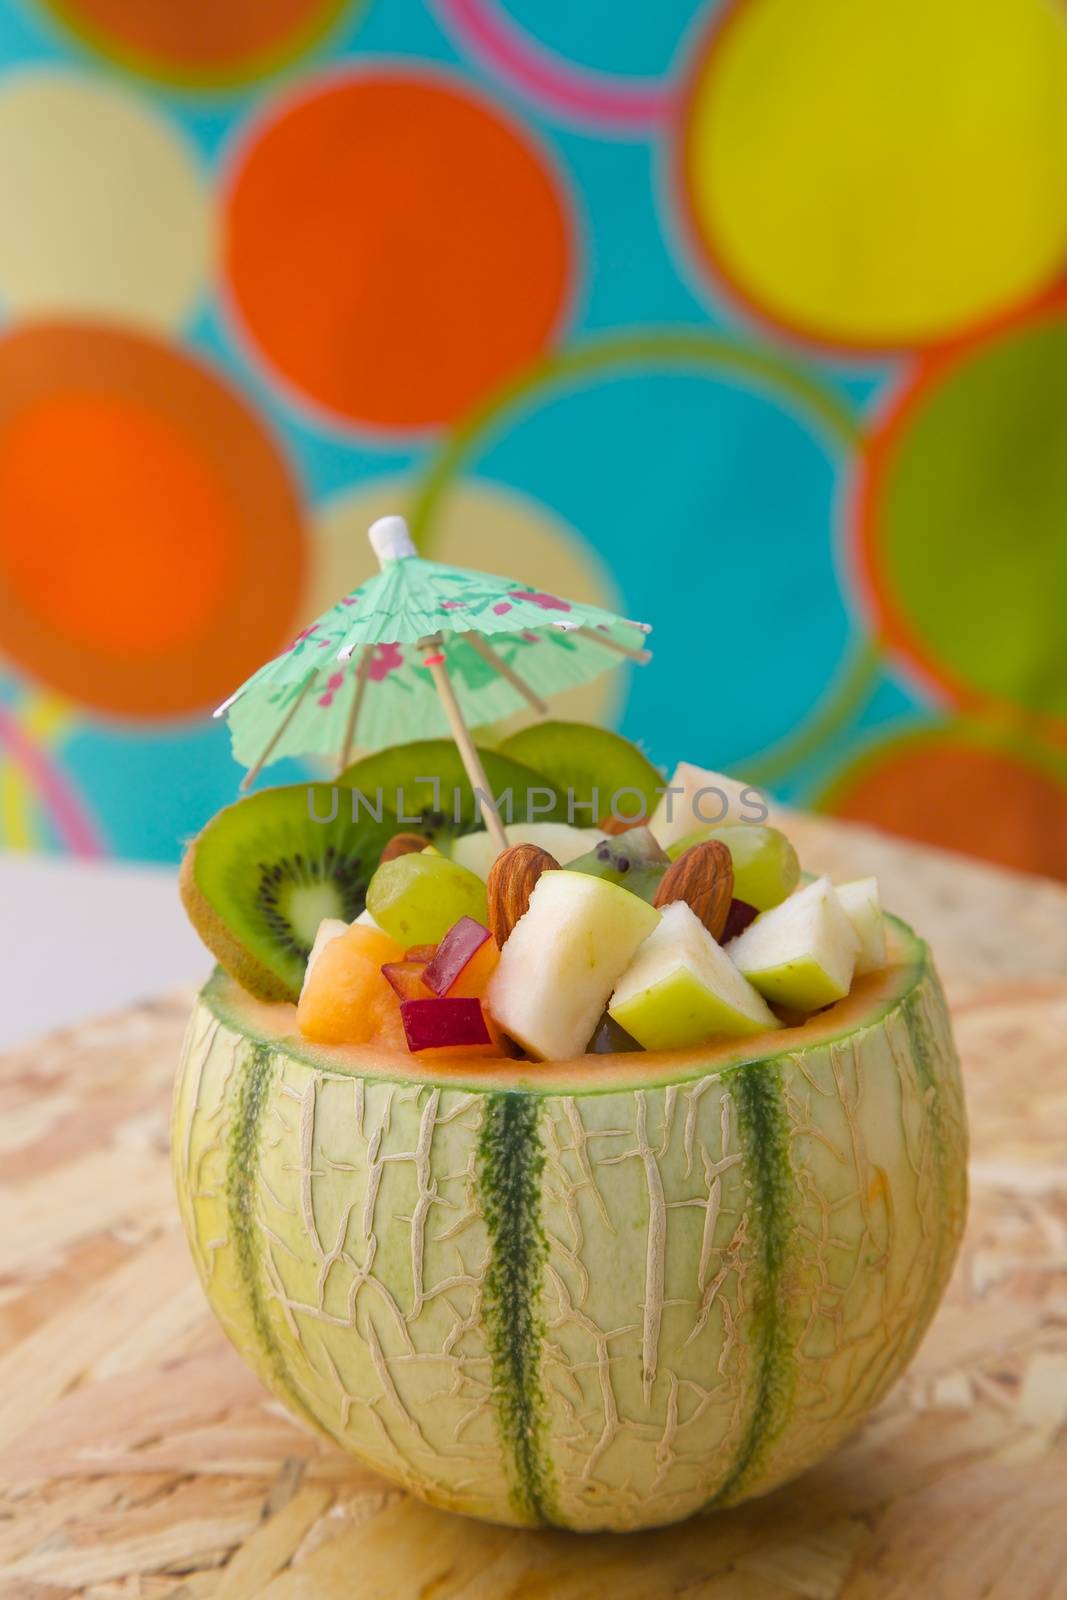 Vitamin dessert- fruit salad in the honeydew melon skin on the wooden surface. Decorated by paper umbrella